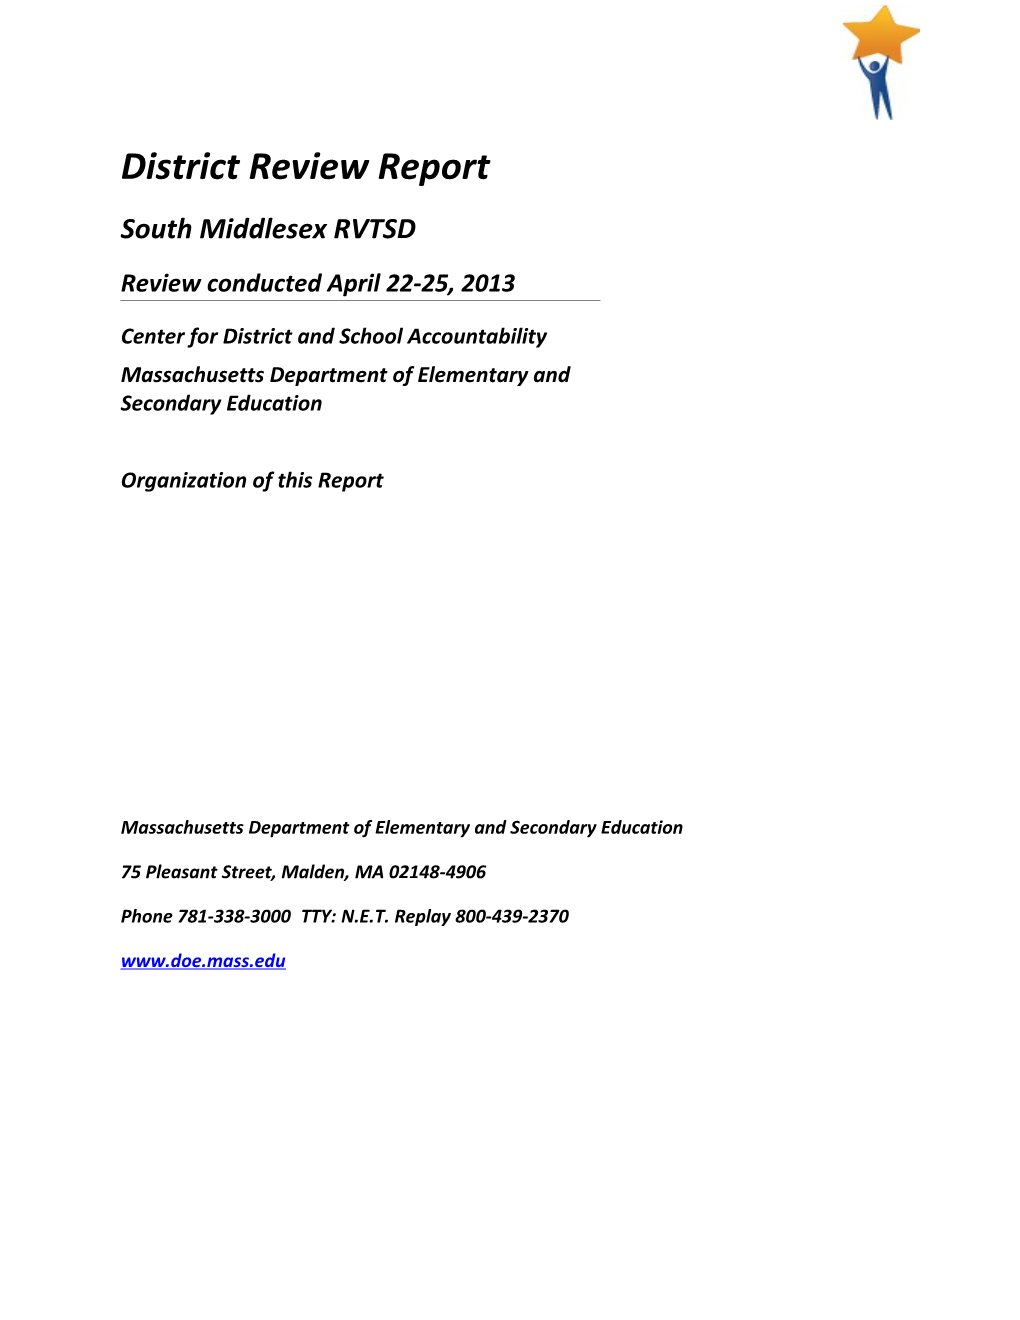 South Middlesex RVTSD District Review Report, 2013 Onsite